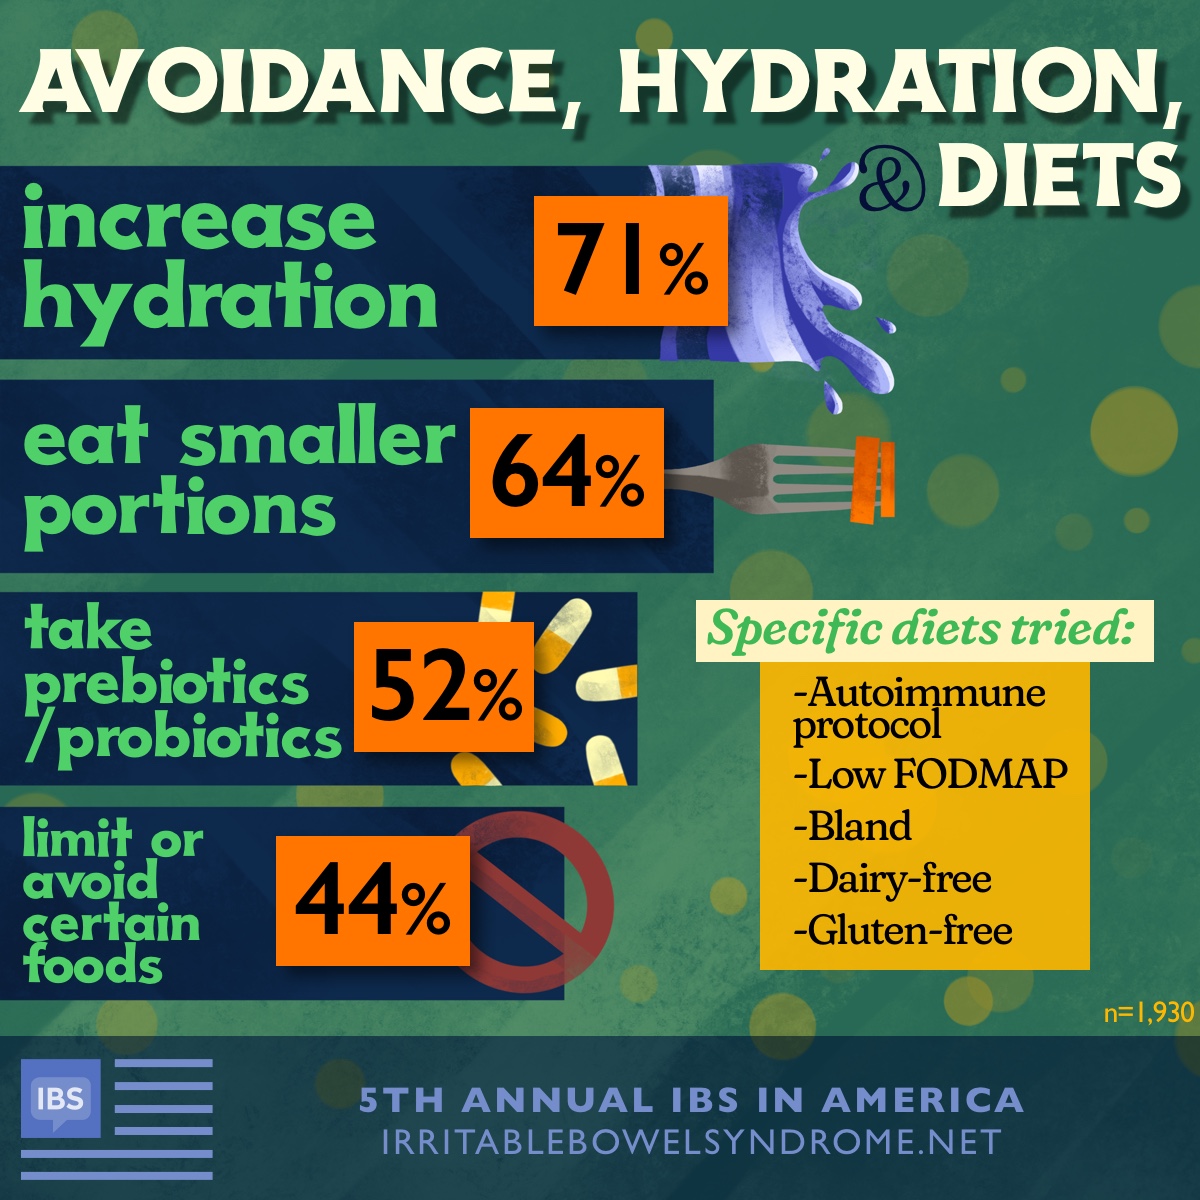 Infographic featuring data on non-prescription treatments for IBS, including diets tried, increased hydration, smaller portions, pre- or probiotics, and limiting or avoiding certain foods.